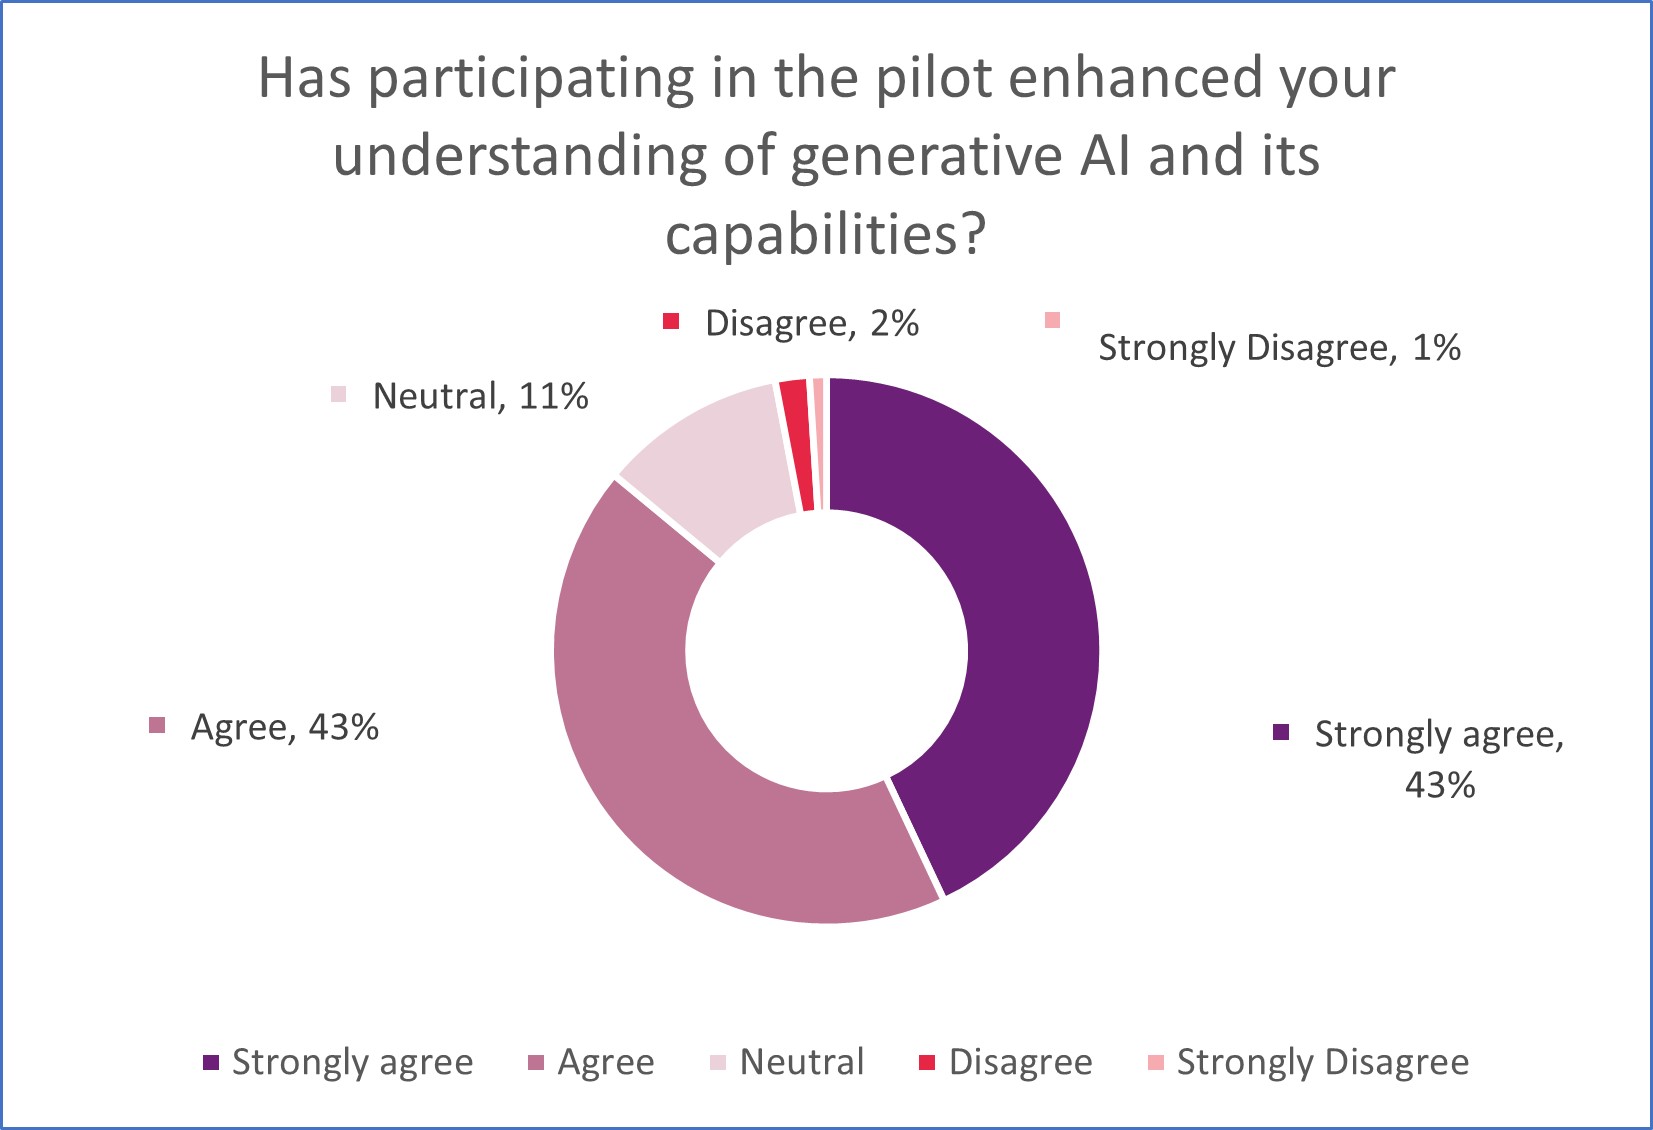  A pie chart showing if the TeacherMaitc pilot had helped enhance their understanding of generative AI and its capabilities. 43% strongly agreed, 43% agreed, 11% were neutral, 2% disagreed and 1% strongly disagreed. 